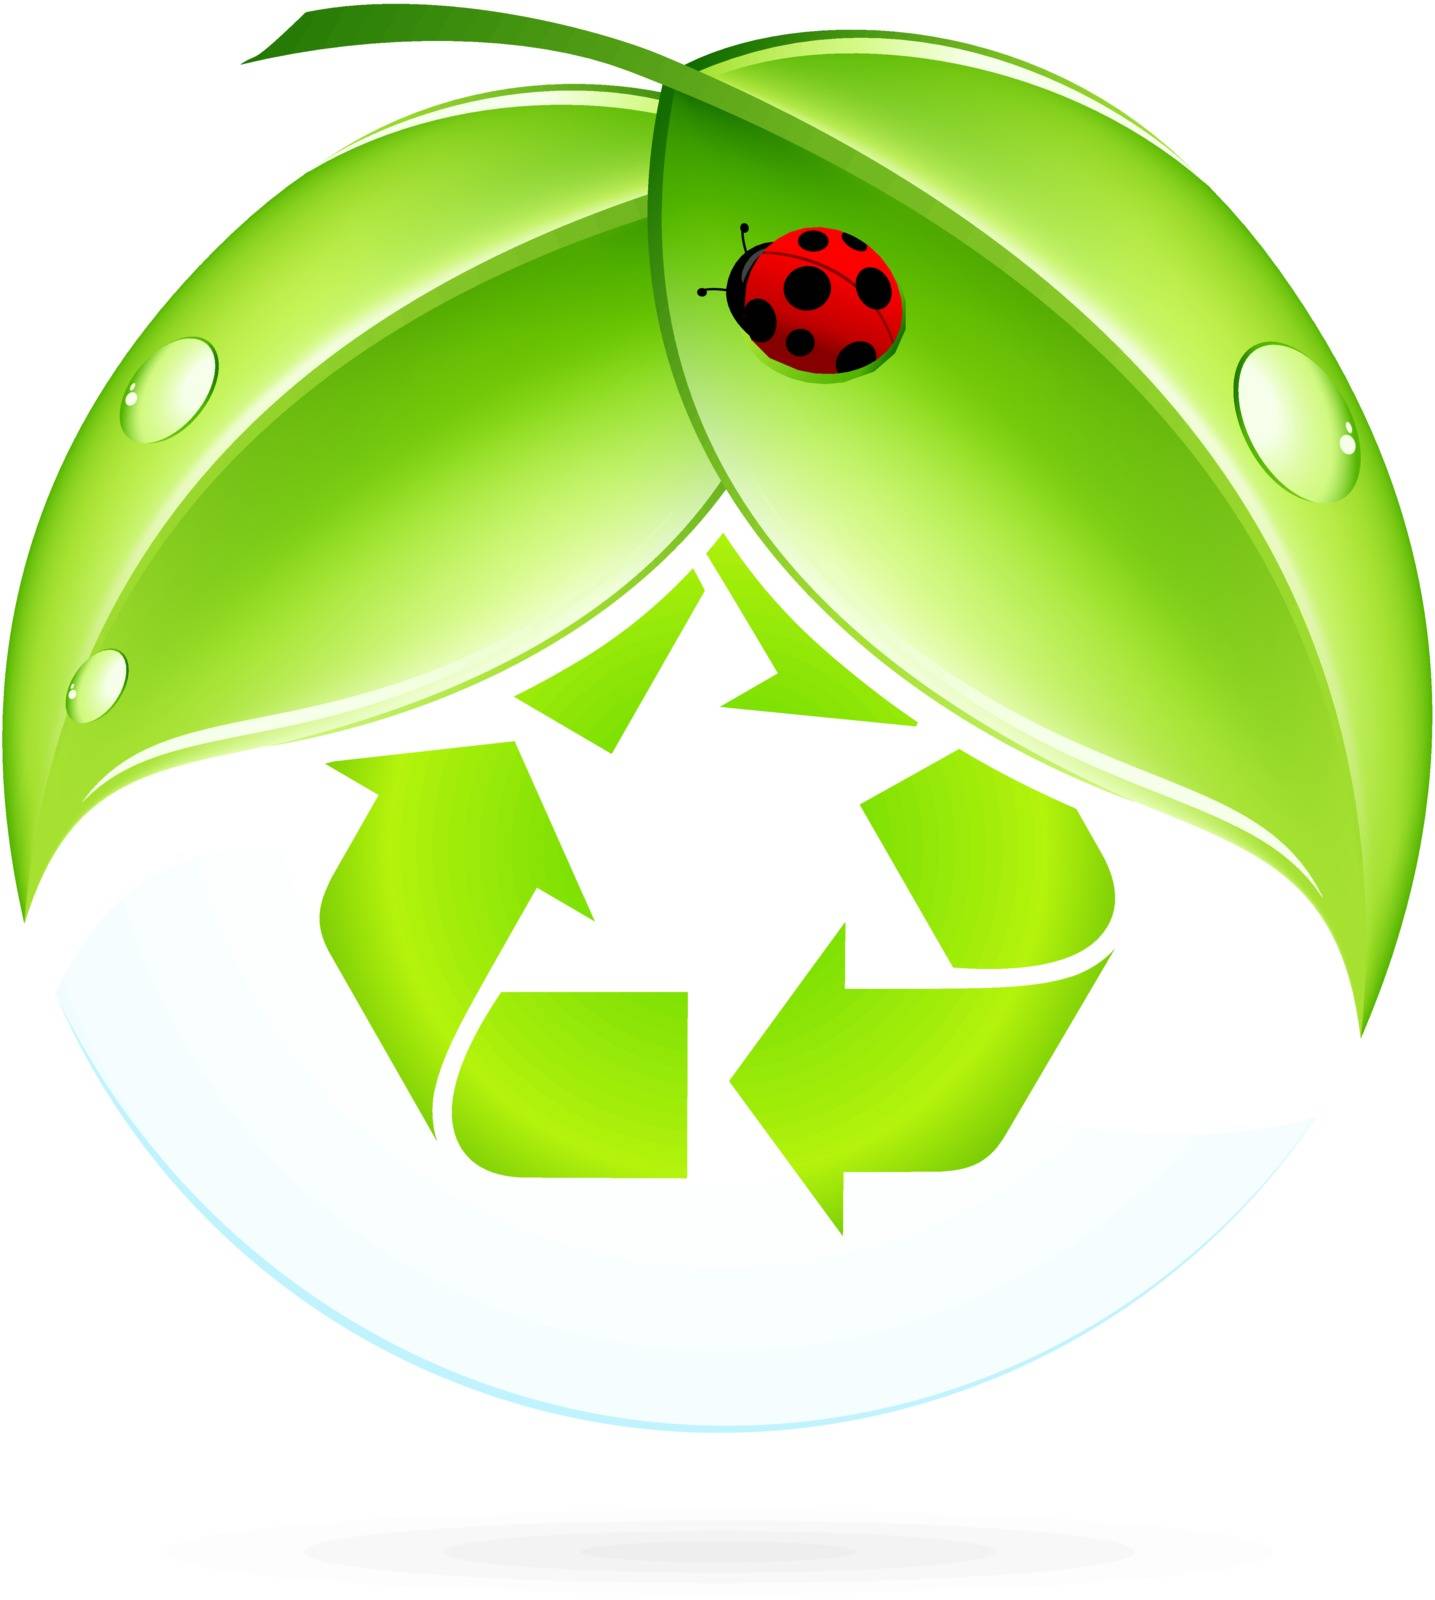 Recycling Symbol with Leaves and Ladybug